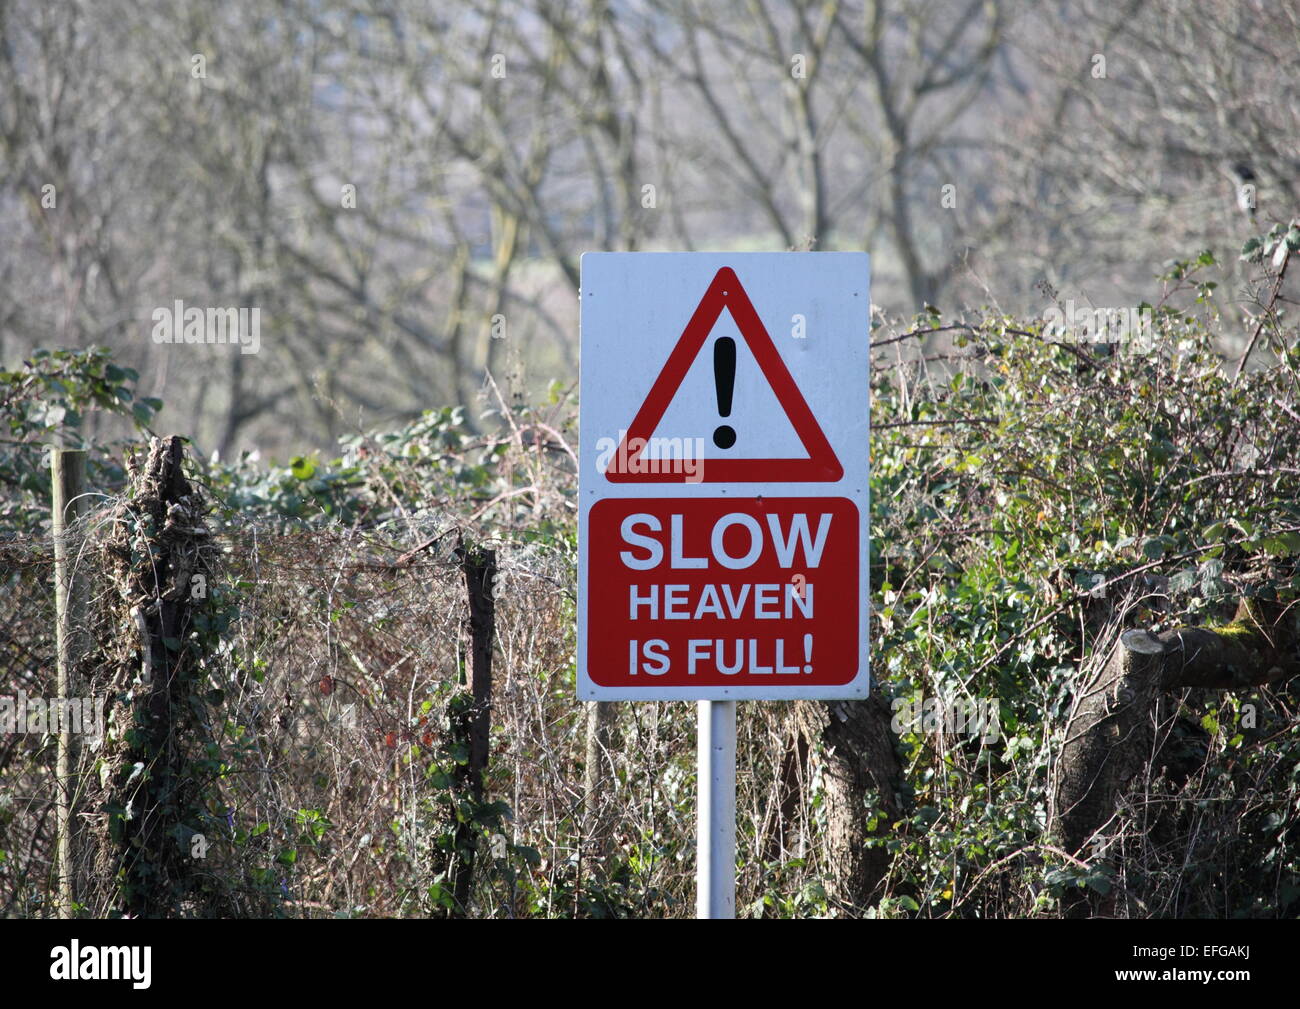 A funny road sign in Devon, England that is trying to make drivers slow down in the narrow country lane. Stock Photo